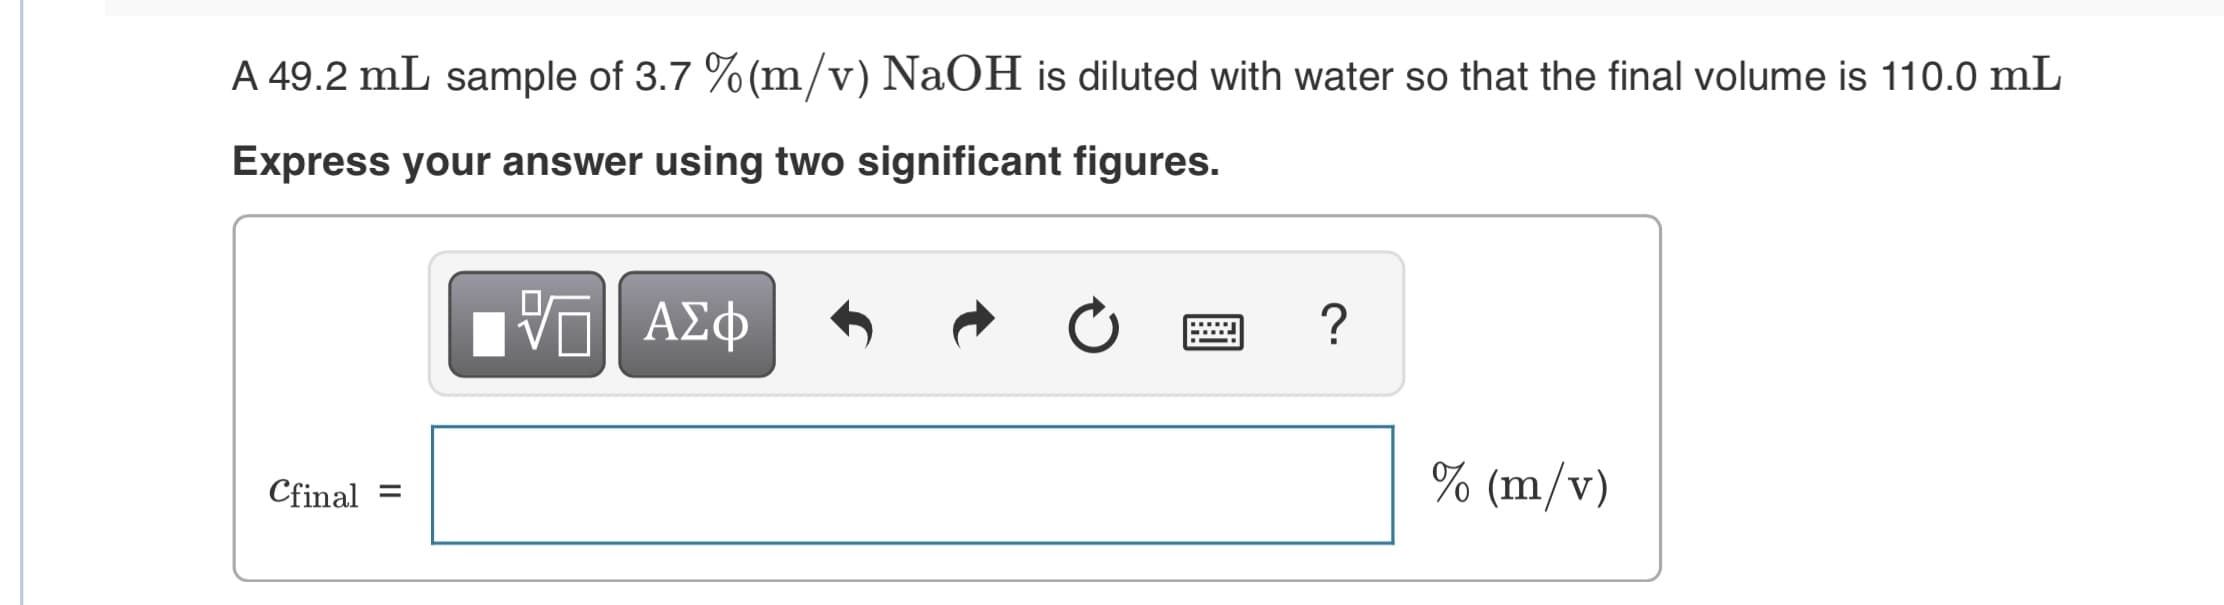 A 49.2 mL sample of 3.7 % (m/v) NaOH is diluted with water so that the final volume is 110.0 mL
Express your answer using two significant figures.
ΑΣφ
% (m/v)
Cfinal
